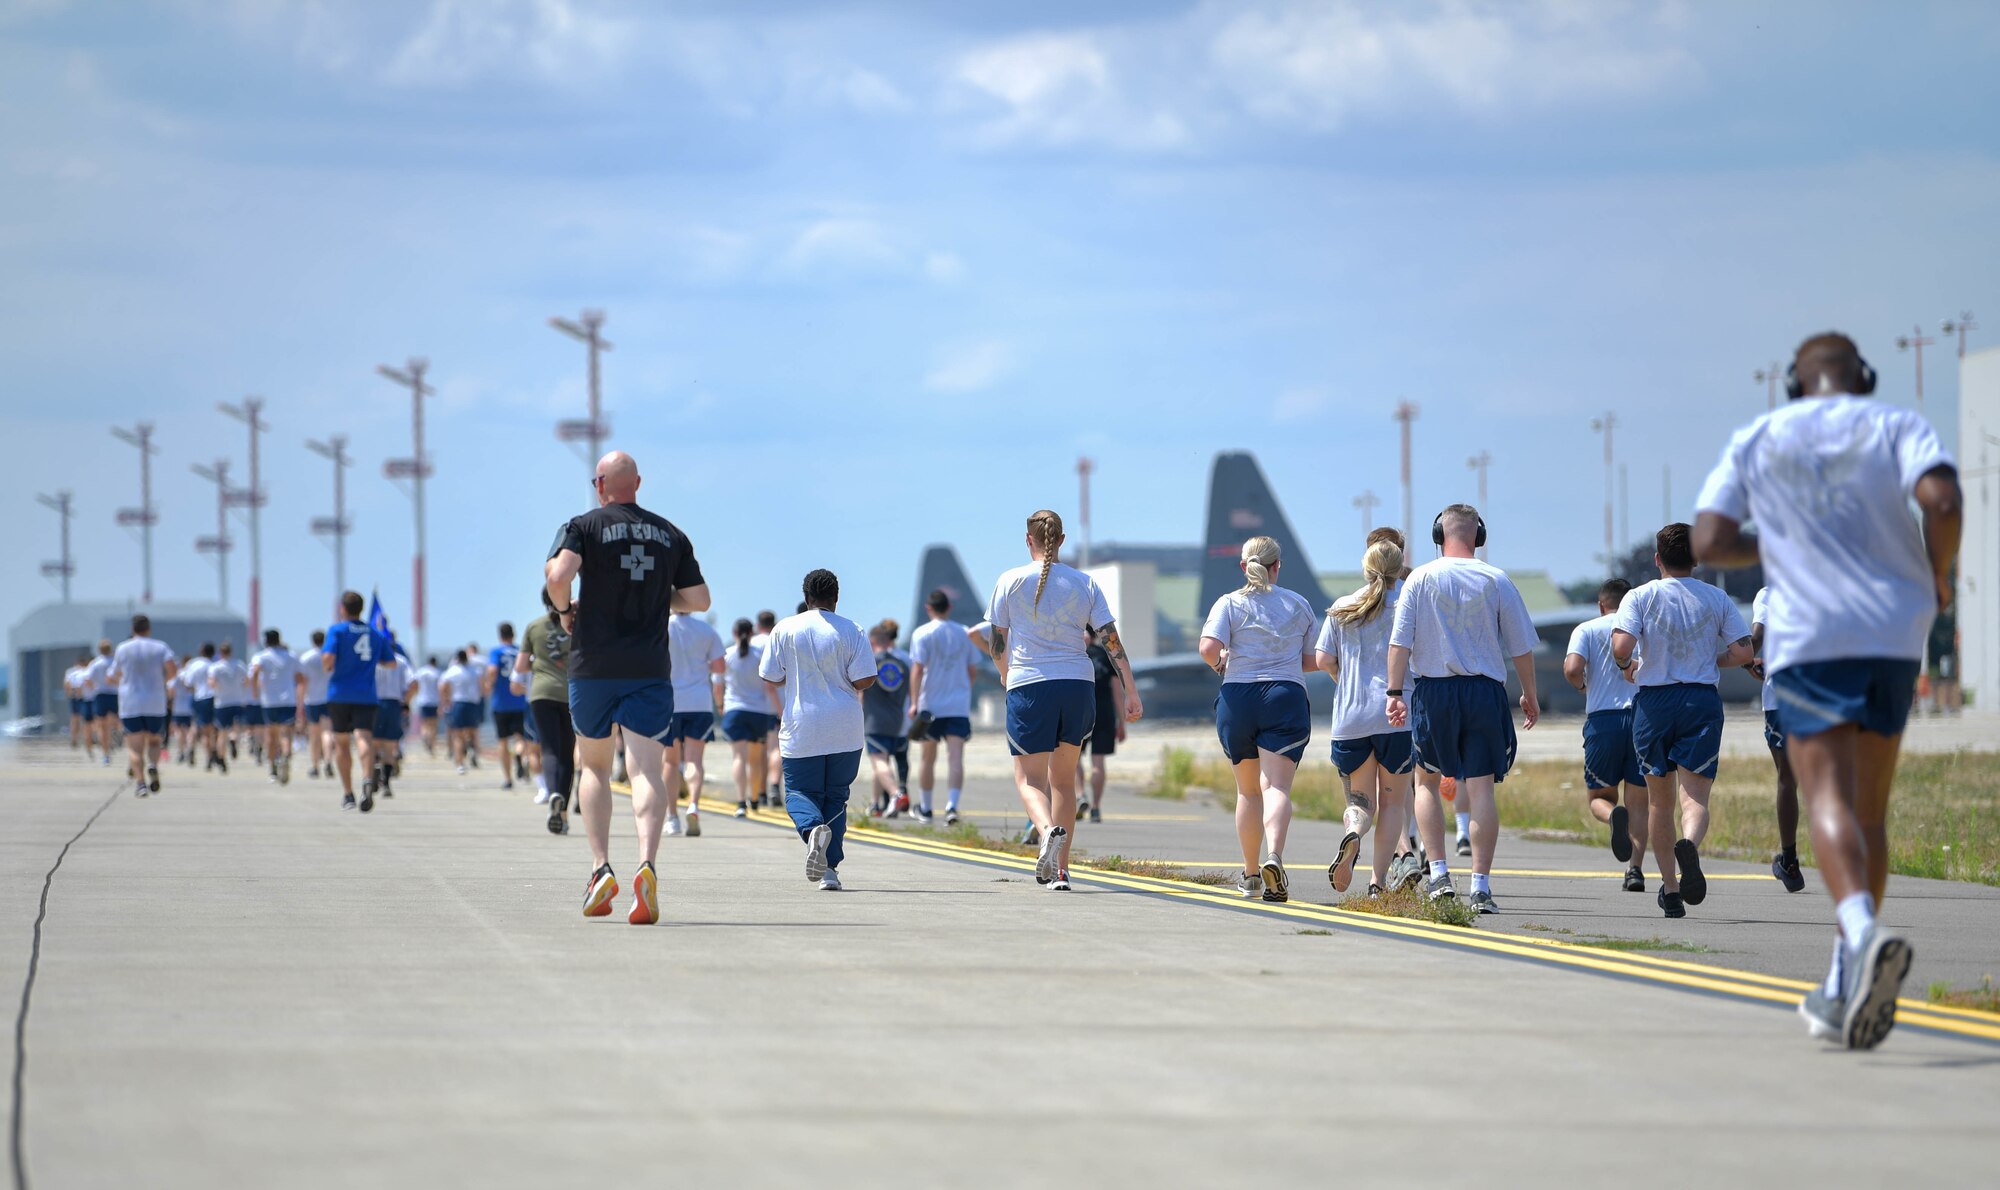 Members of the 86th Airlift Wing participate in a wing run in honor of Ramstein Air Base’s 70th Anniversary at Ramstein Air Base, Germany, June 29, 2022.